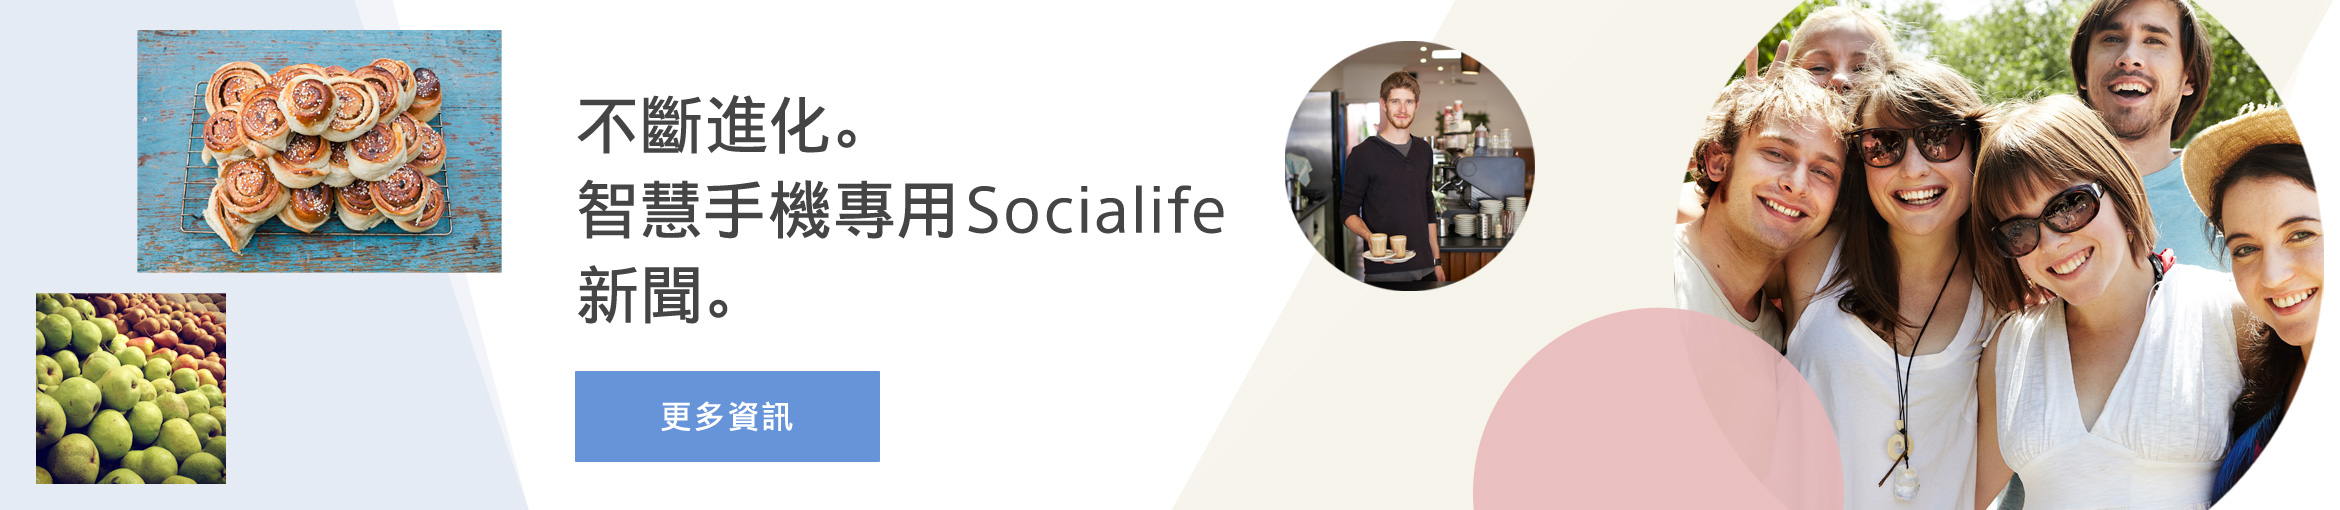 New design and faster performance.Socialife for Android smartphone.